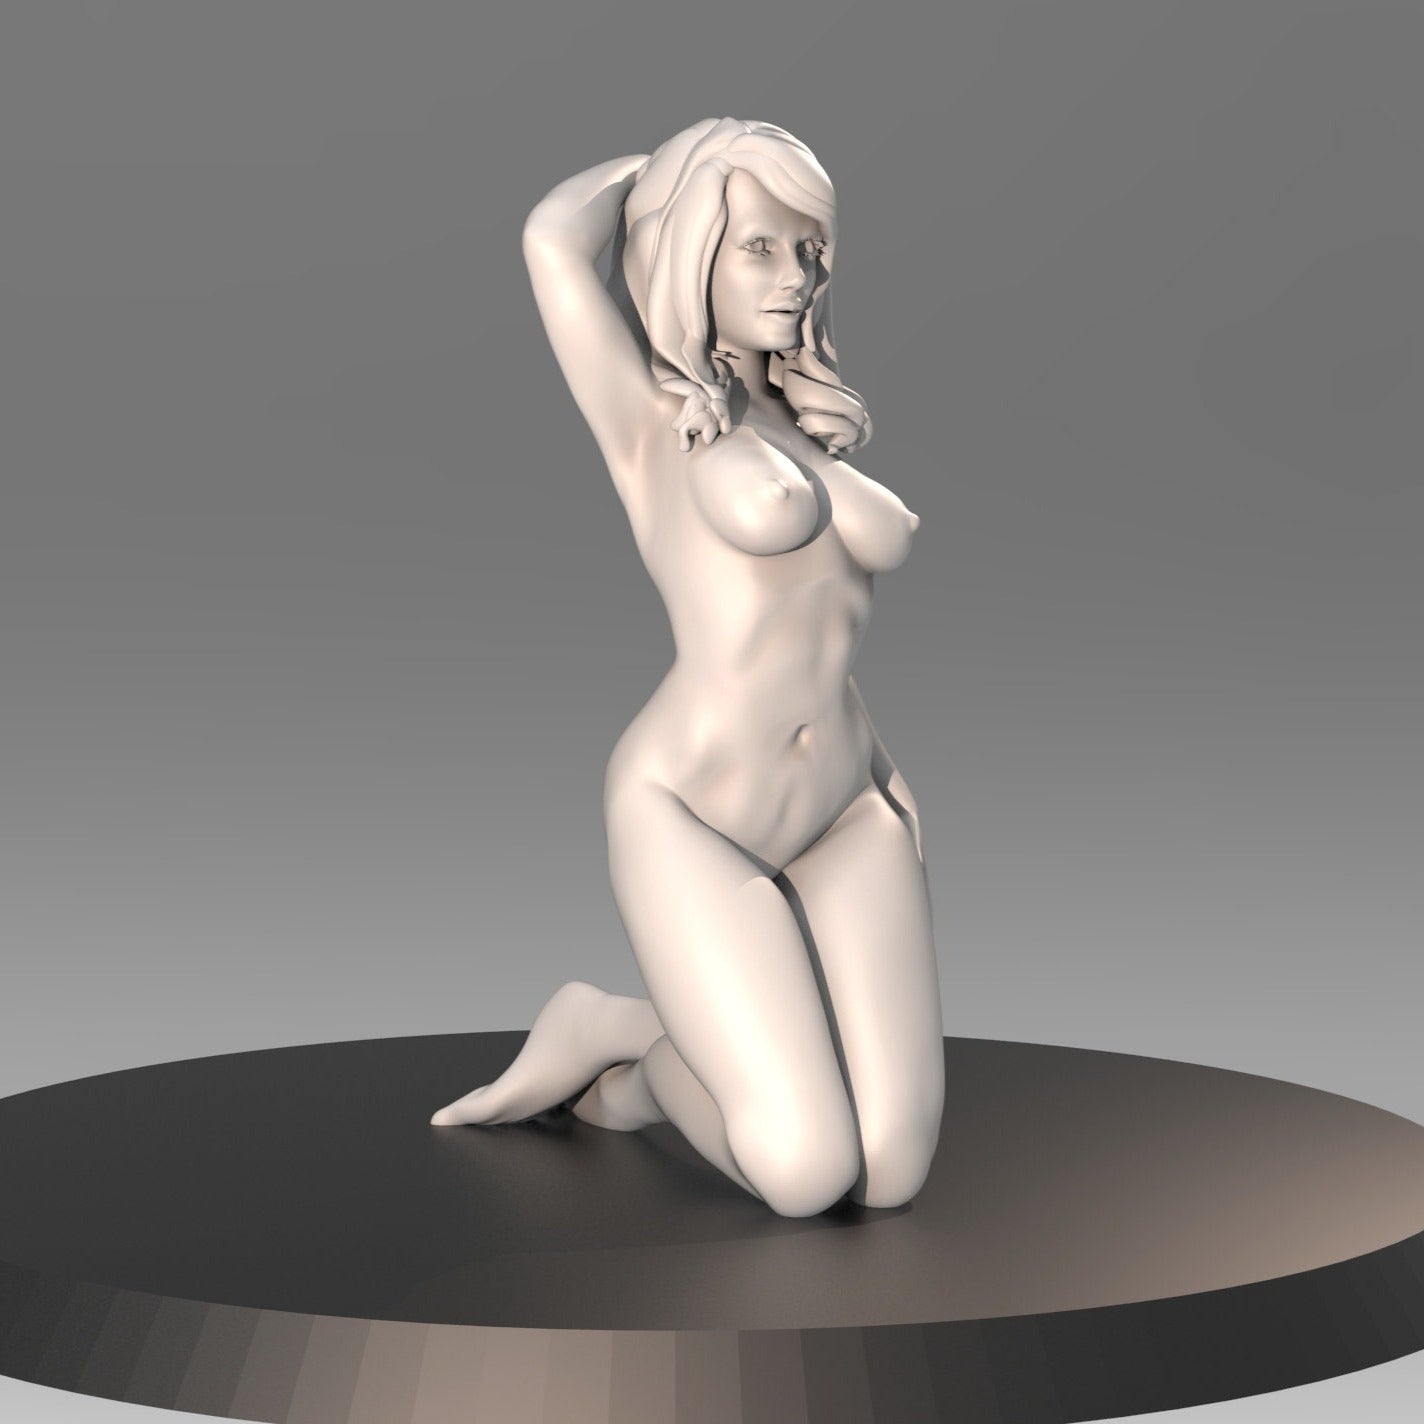 Pinup Girl Vol.1 ANDREA| 35mm / 75mm | 3D Printed | Unpainted | Sexy | Pin|up | NSFW Version | Figurine | Figure | Miniature | Sexy |